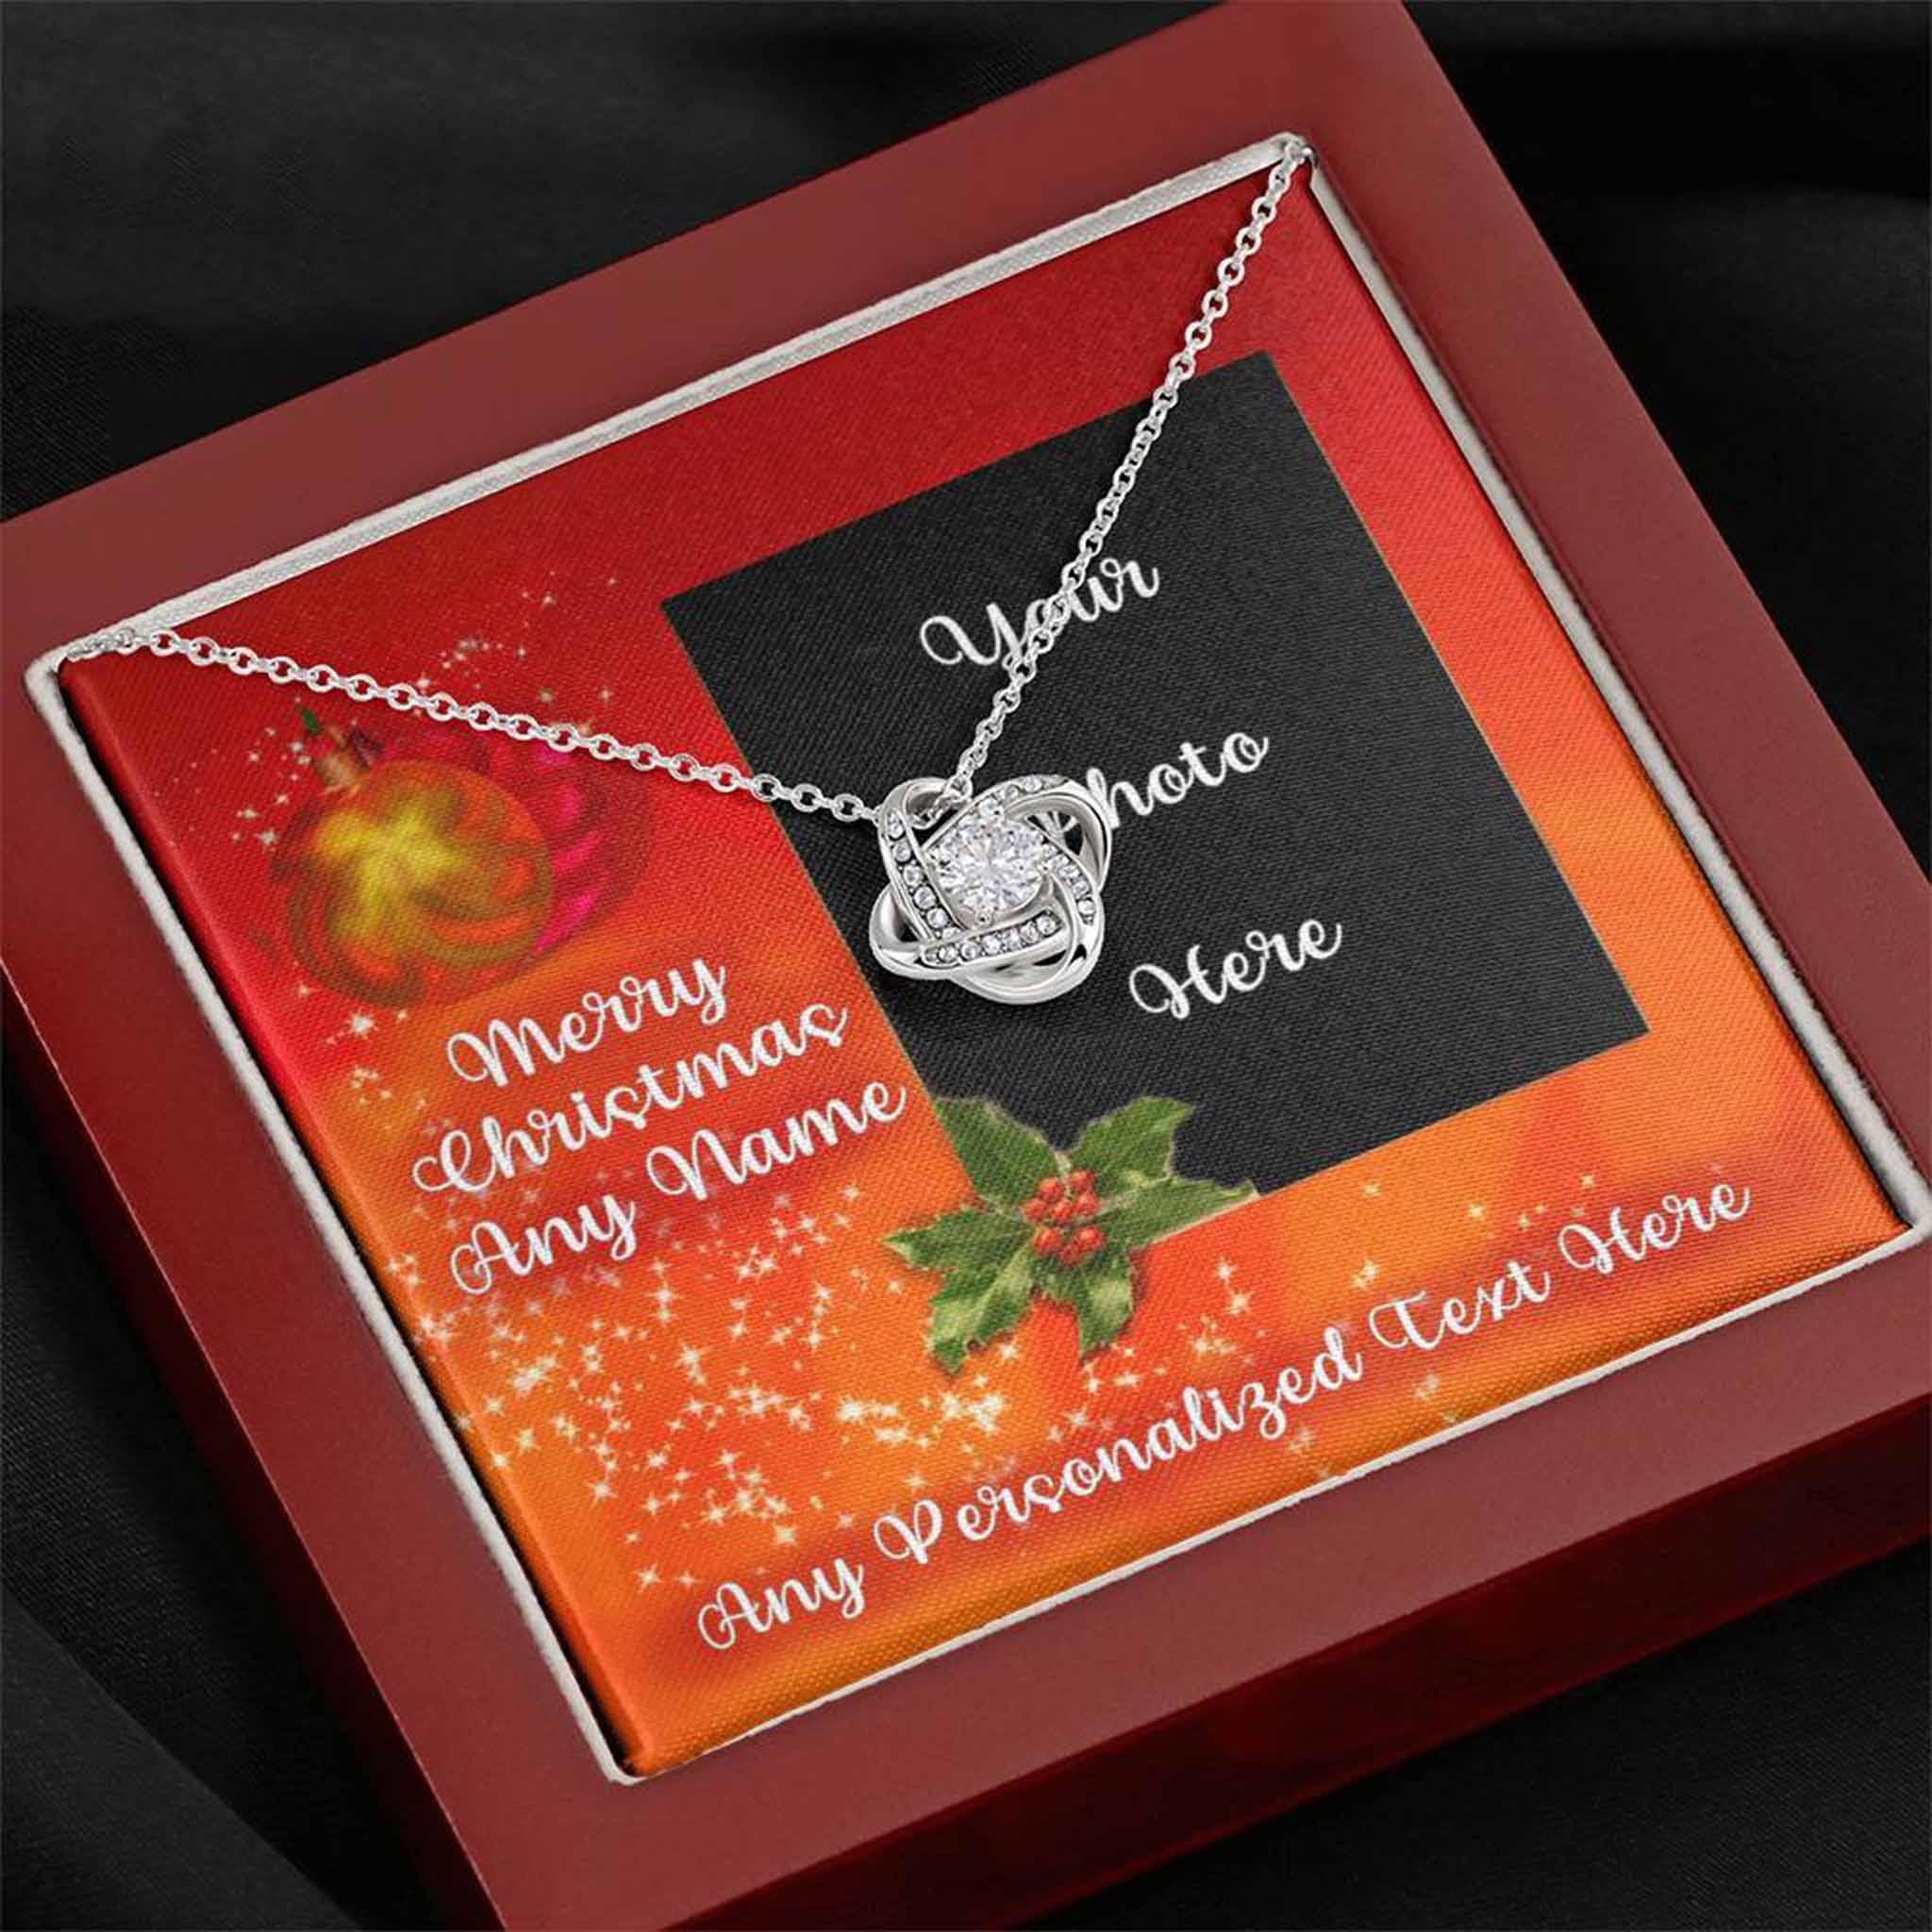 Love Knot Necklace Christmas Photo v1 Personalized Insert CardCustomly Gifts